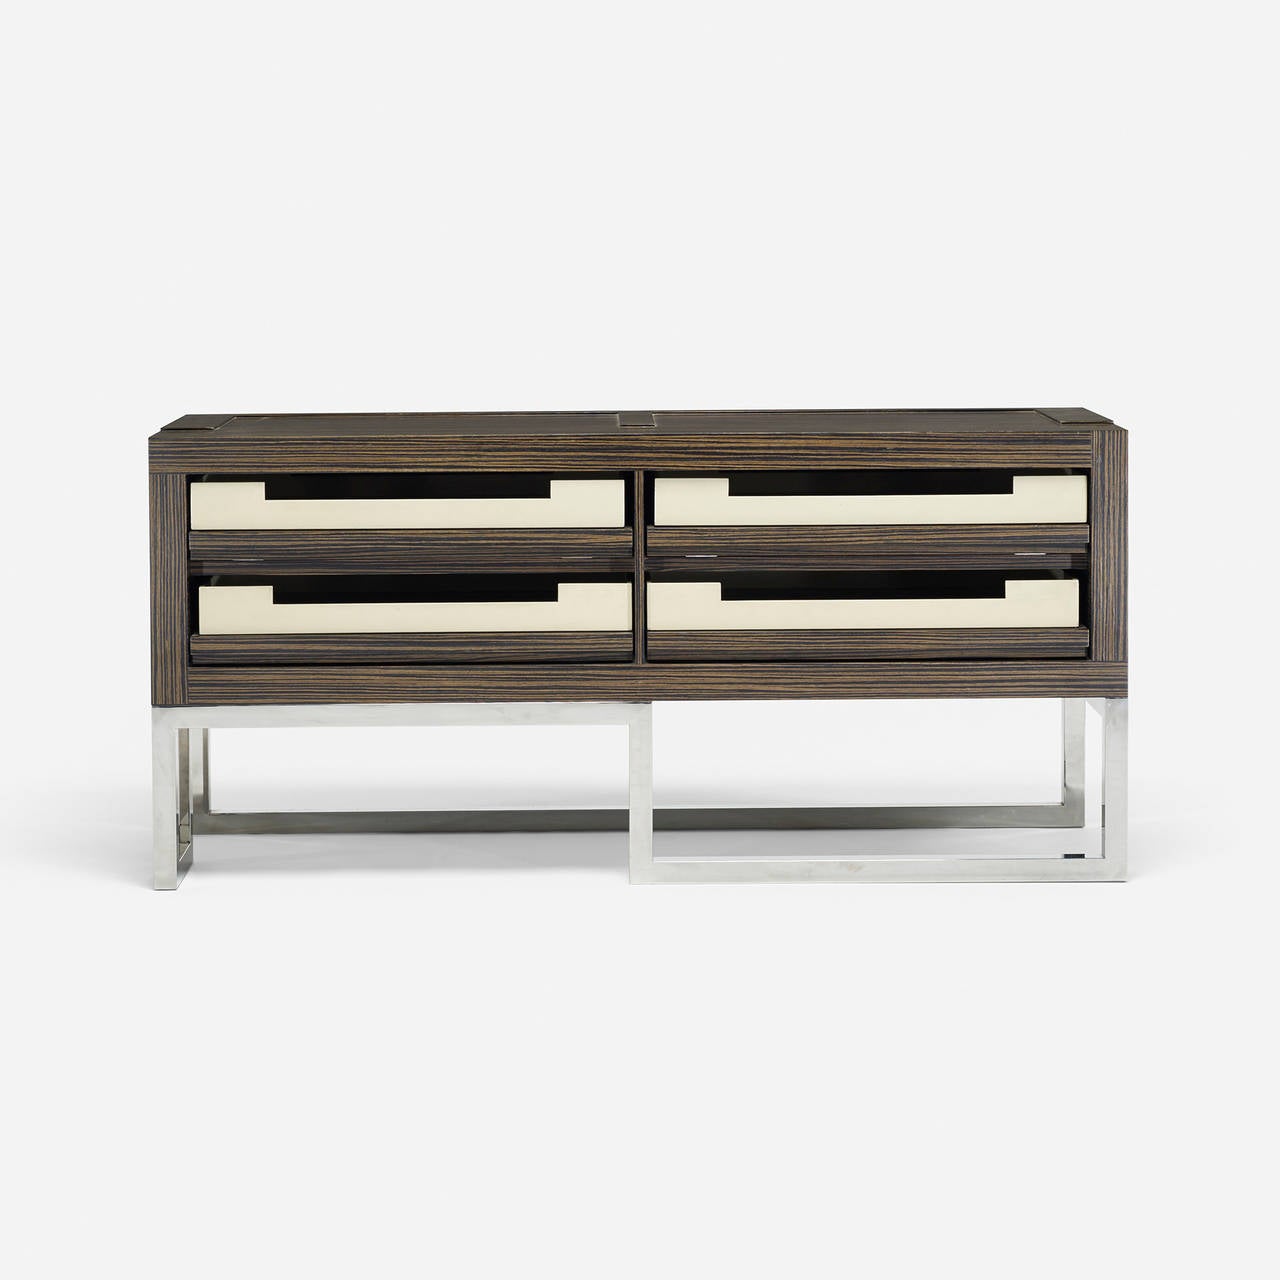 Cabinet features four drawers each containing a removable lacquered tray.